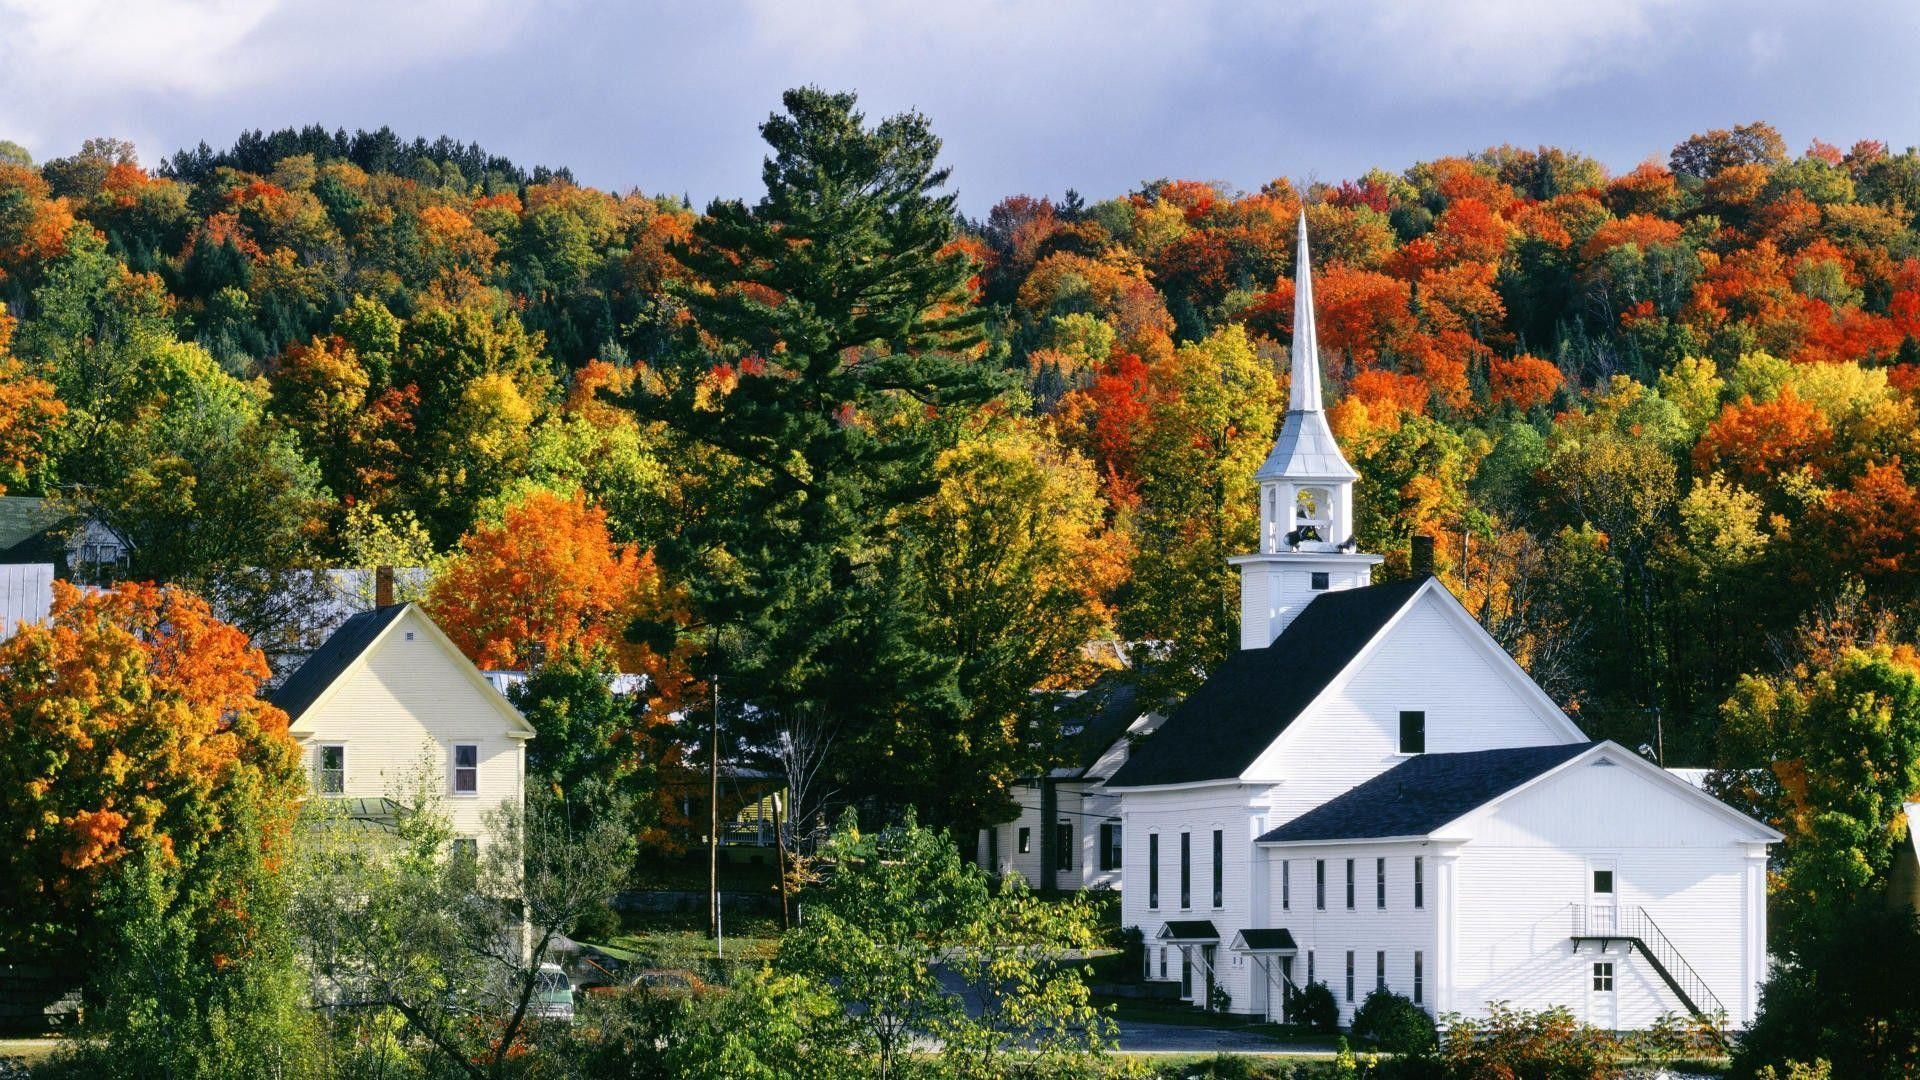 1920x1080 Autumn in New England, Vermont Full HD Wallpaper | New england fall, New england, Old country churches